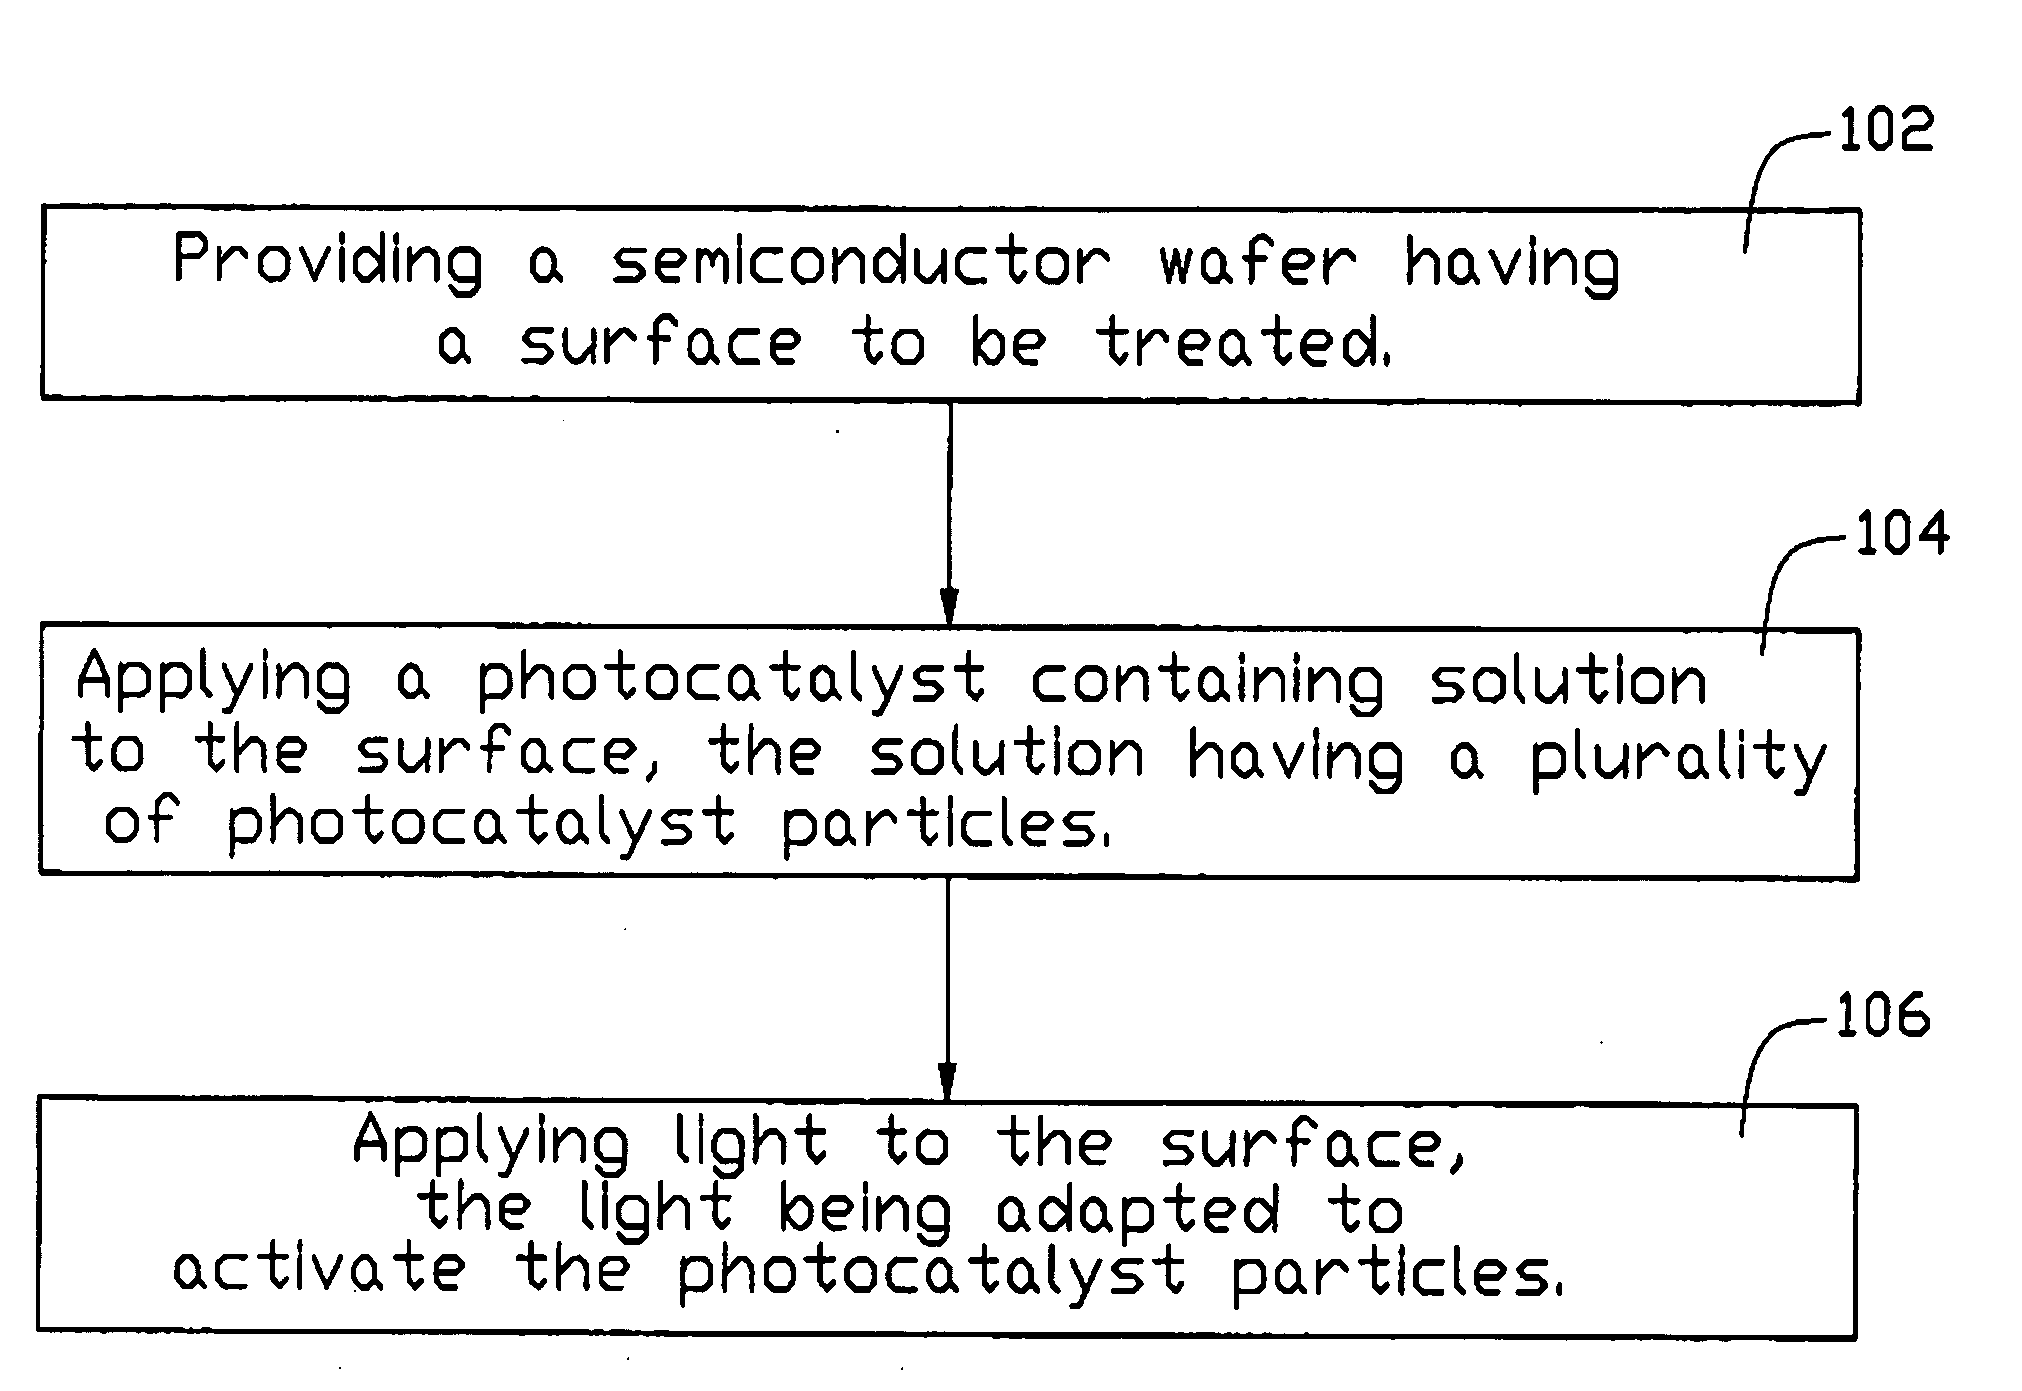 Method for cleaning semiconductor wafers